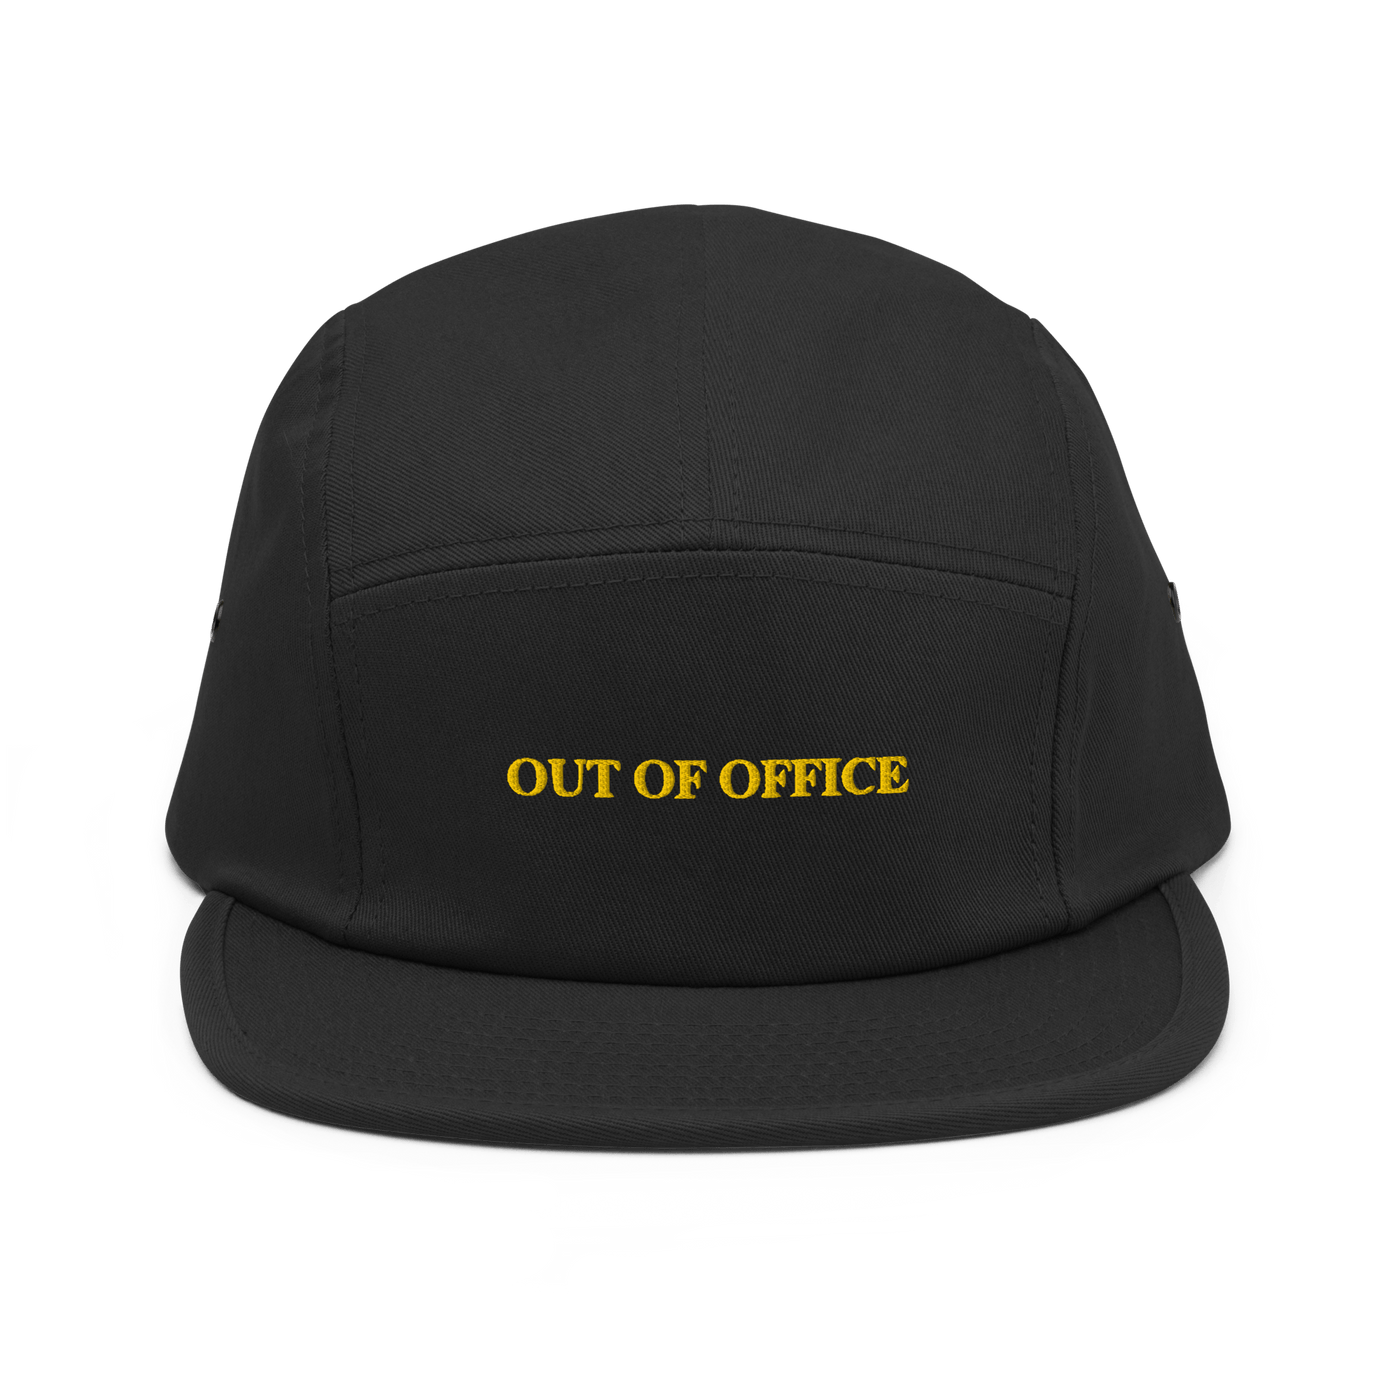 OUT OF OFFICE Five Panel Hat - Black - - Just Another Cap Store